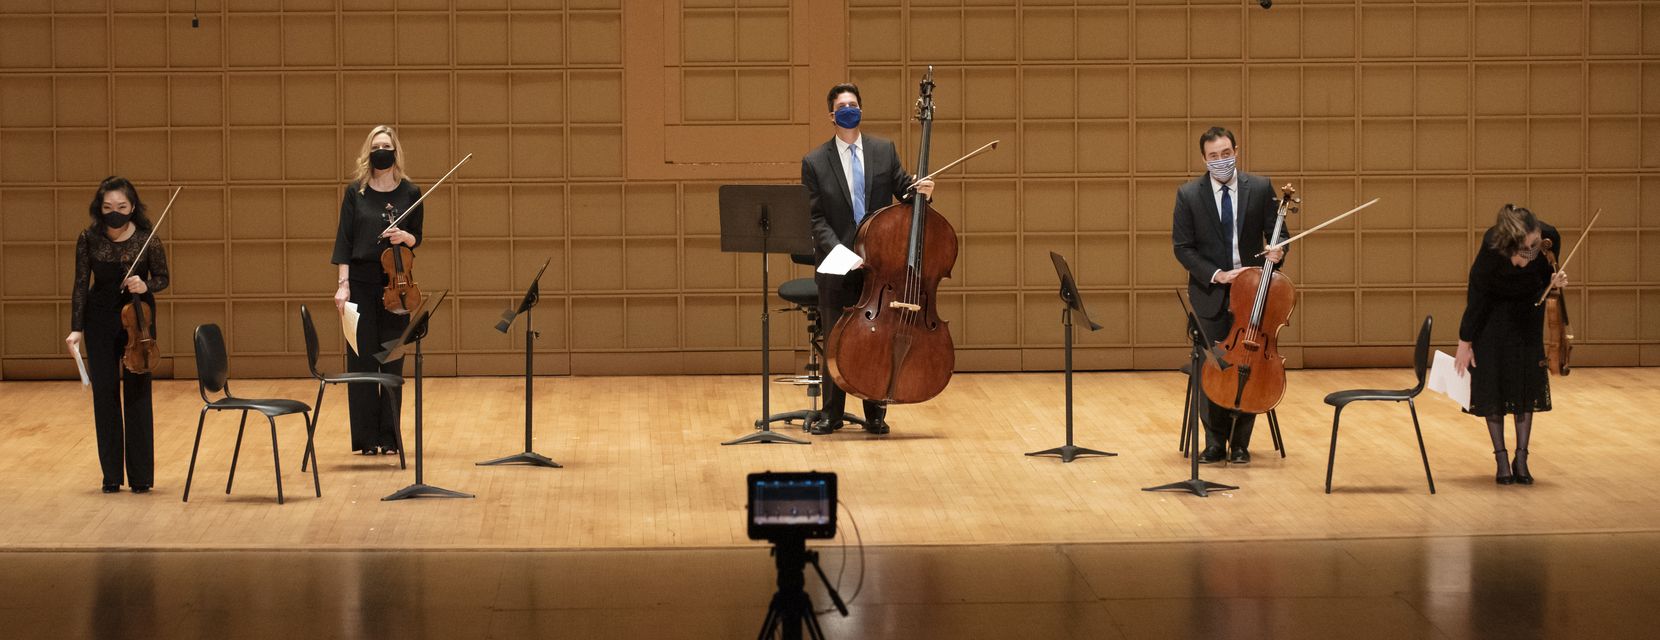 Members of the Dallas Symphony Orchestra were introduced for a video recording before...